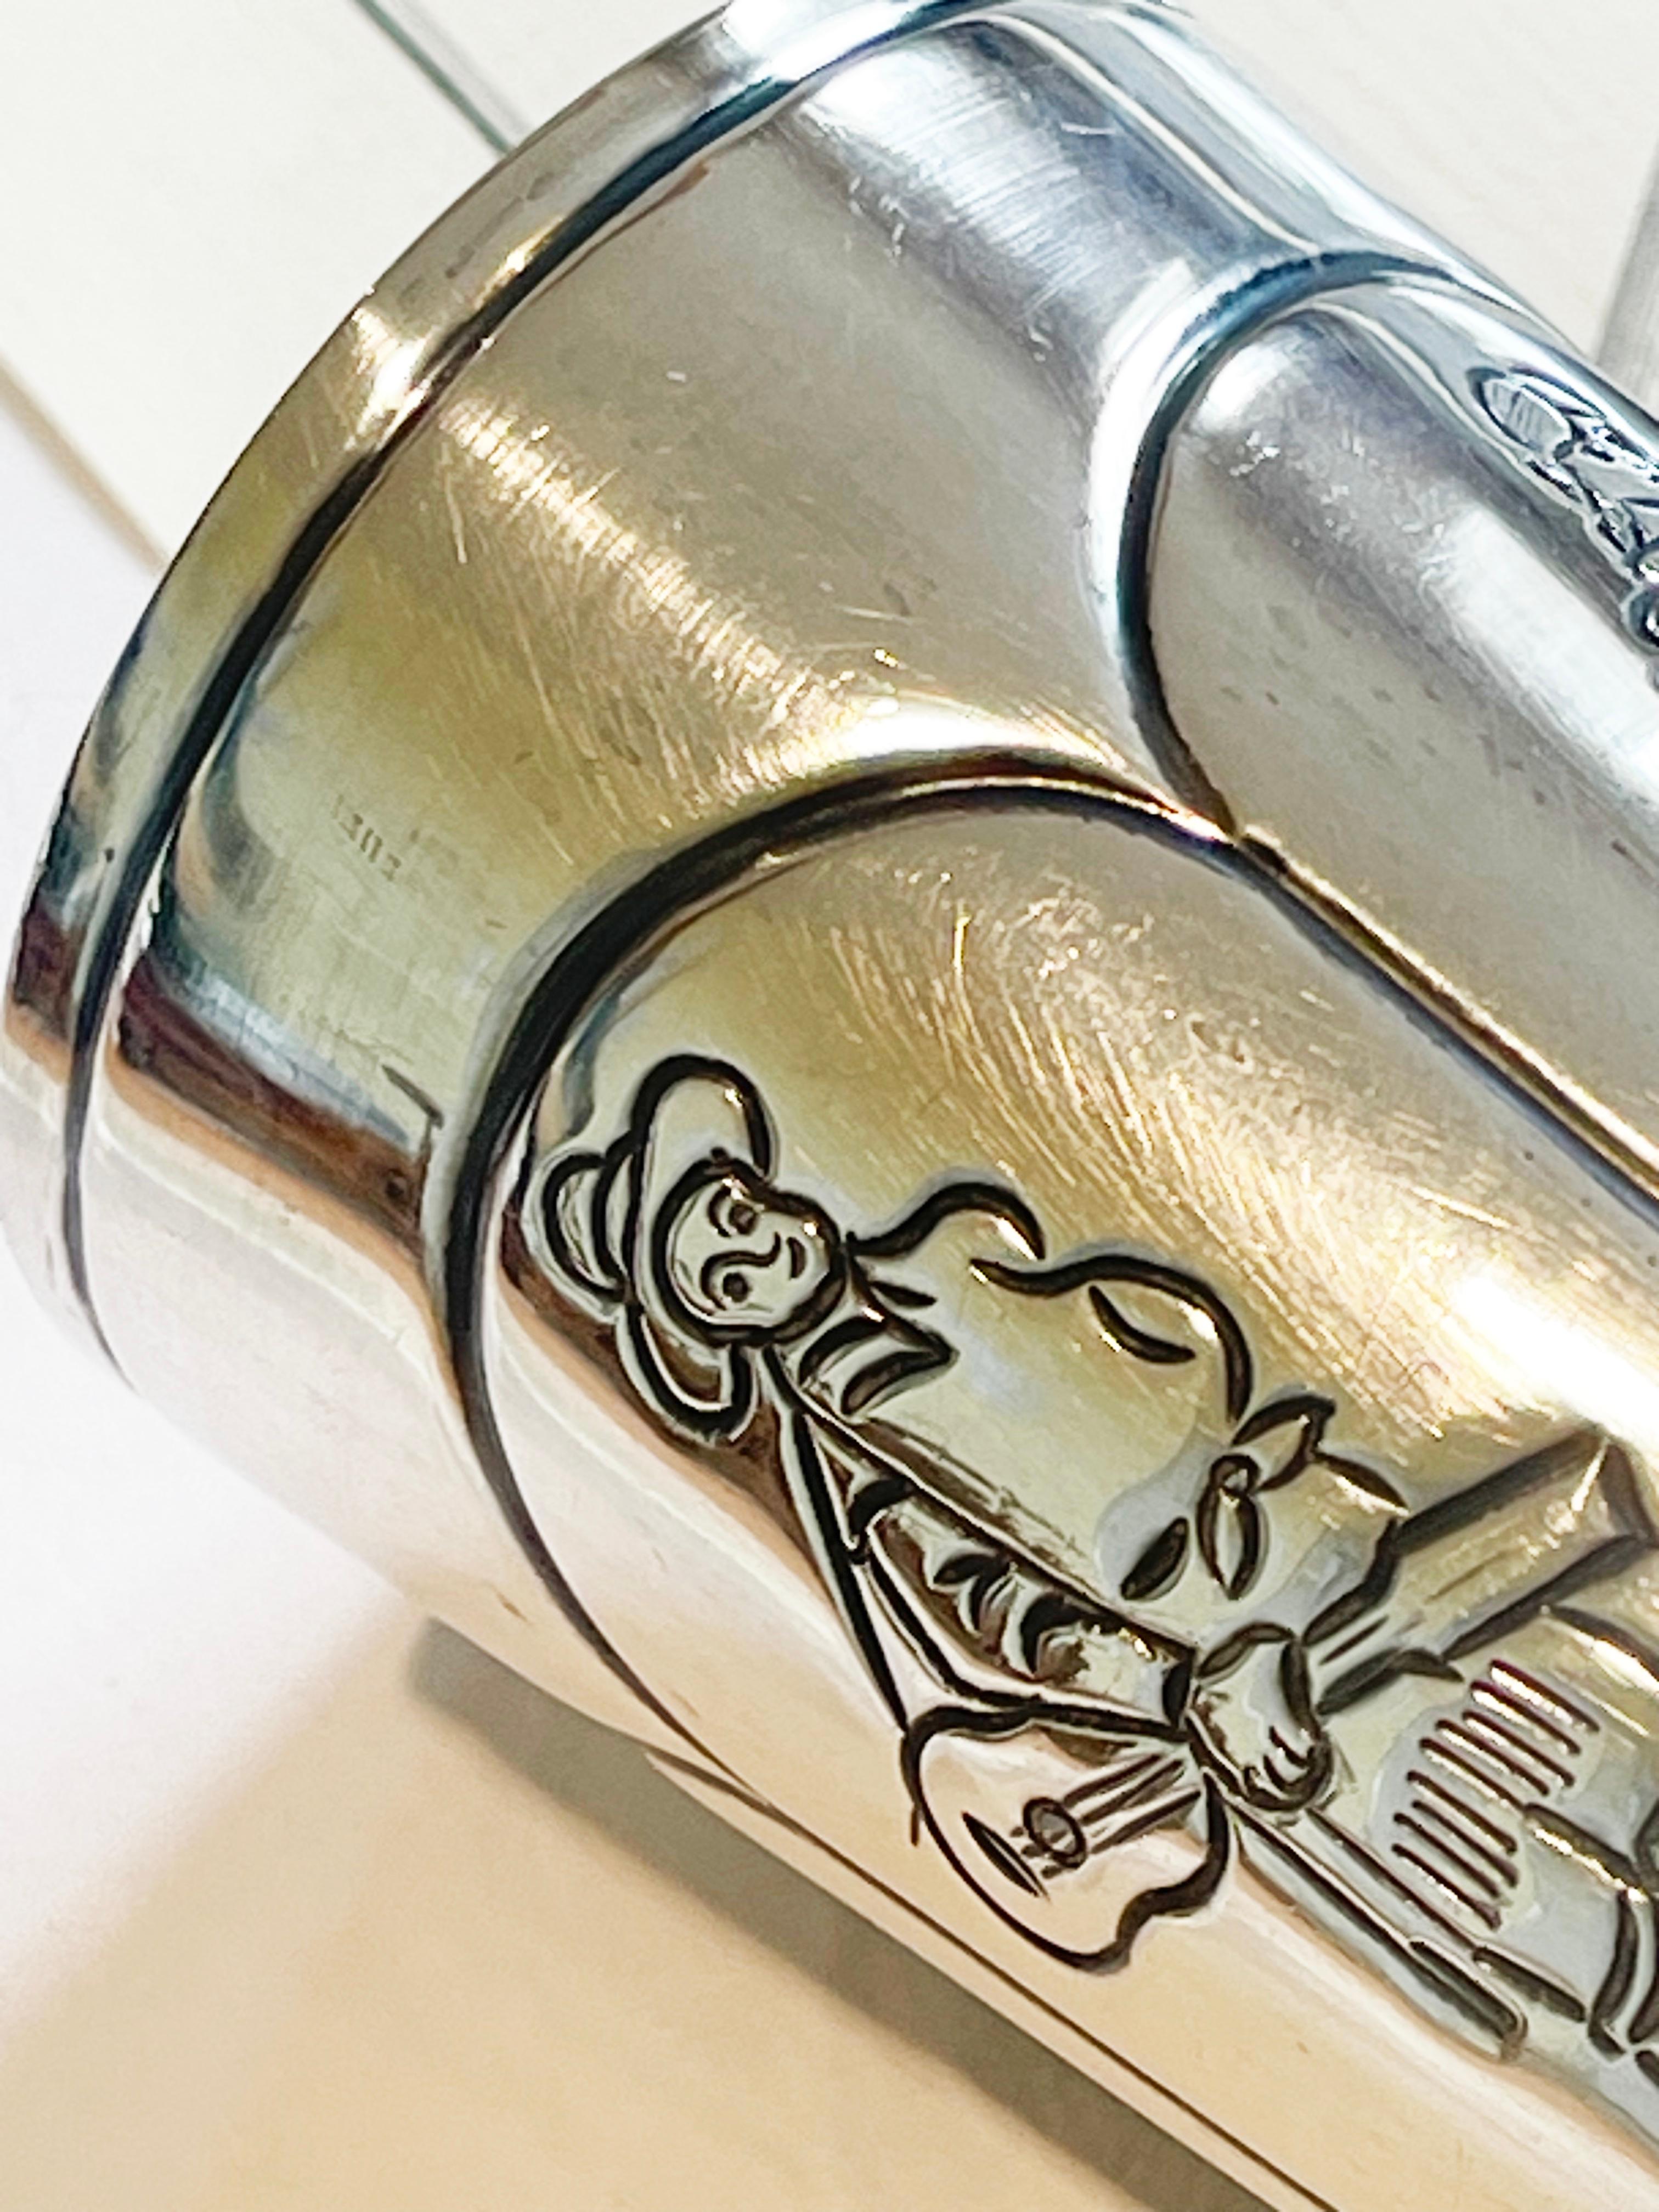 Tane of Mexico Antique Beaker Sterling Silver by J. Marmolejos, ca. 1965 For Sale 3